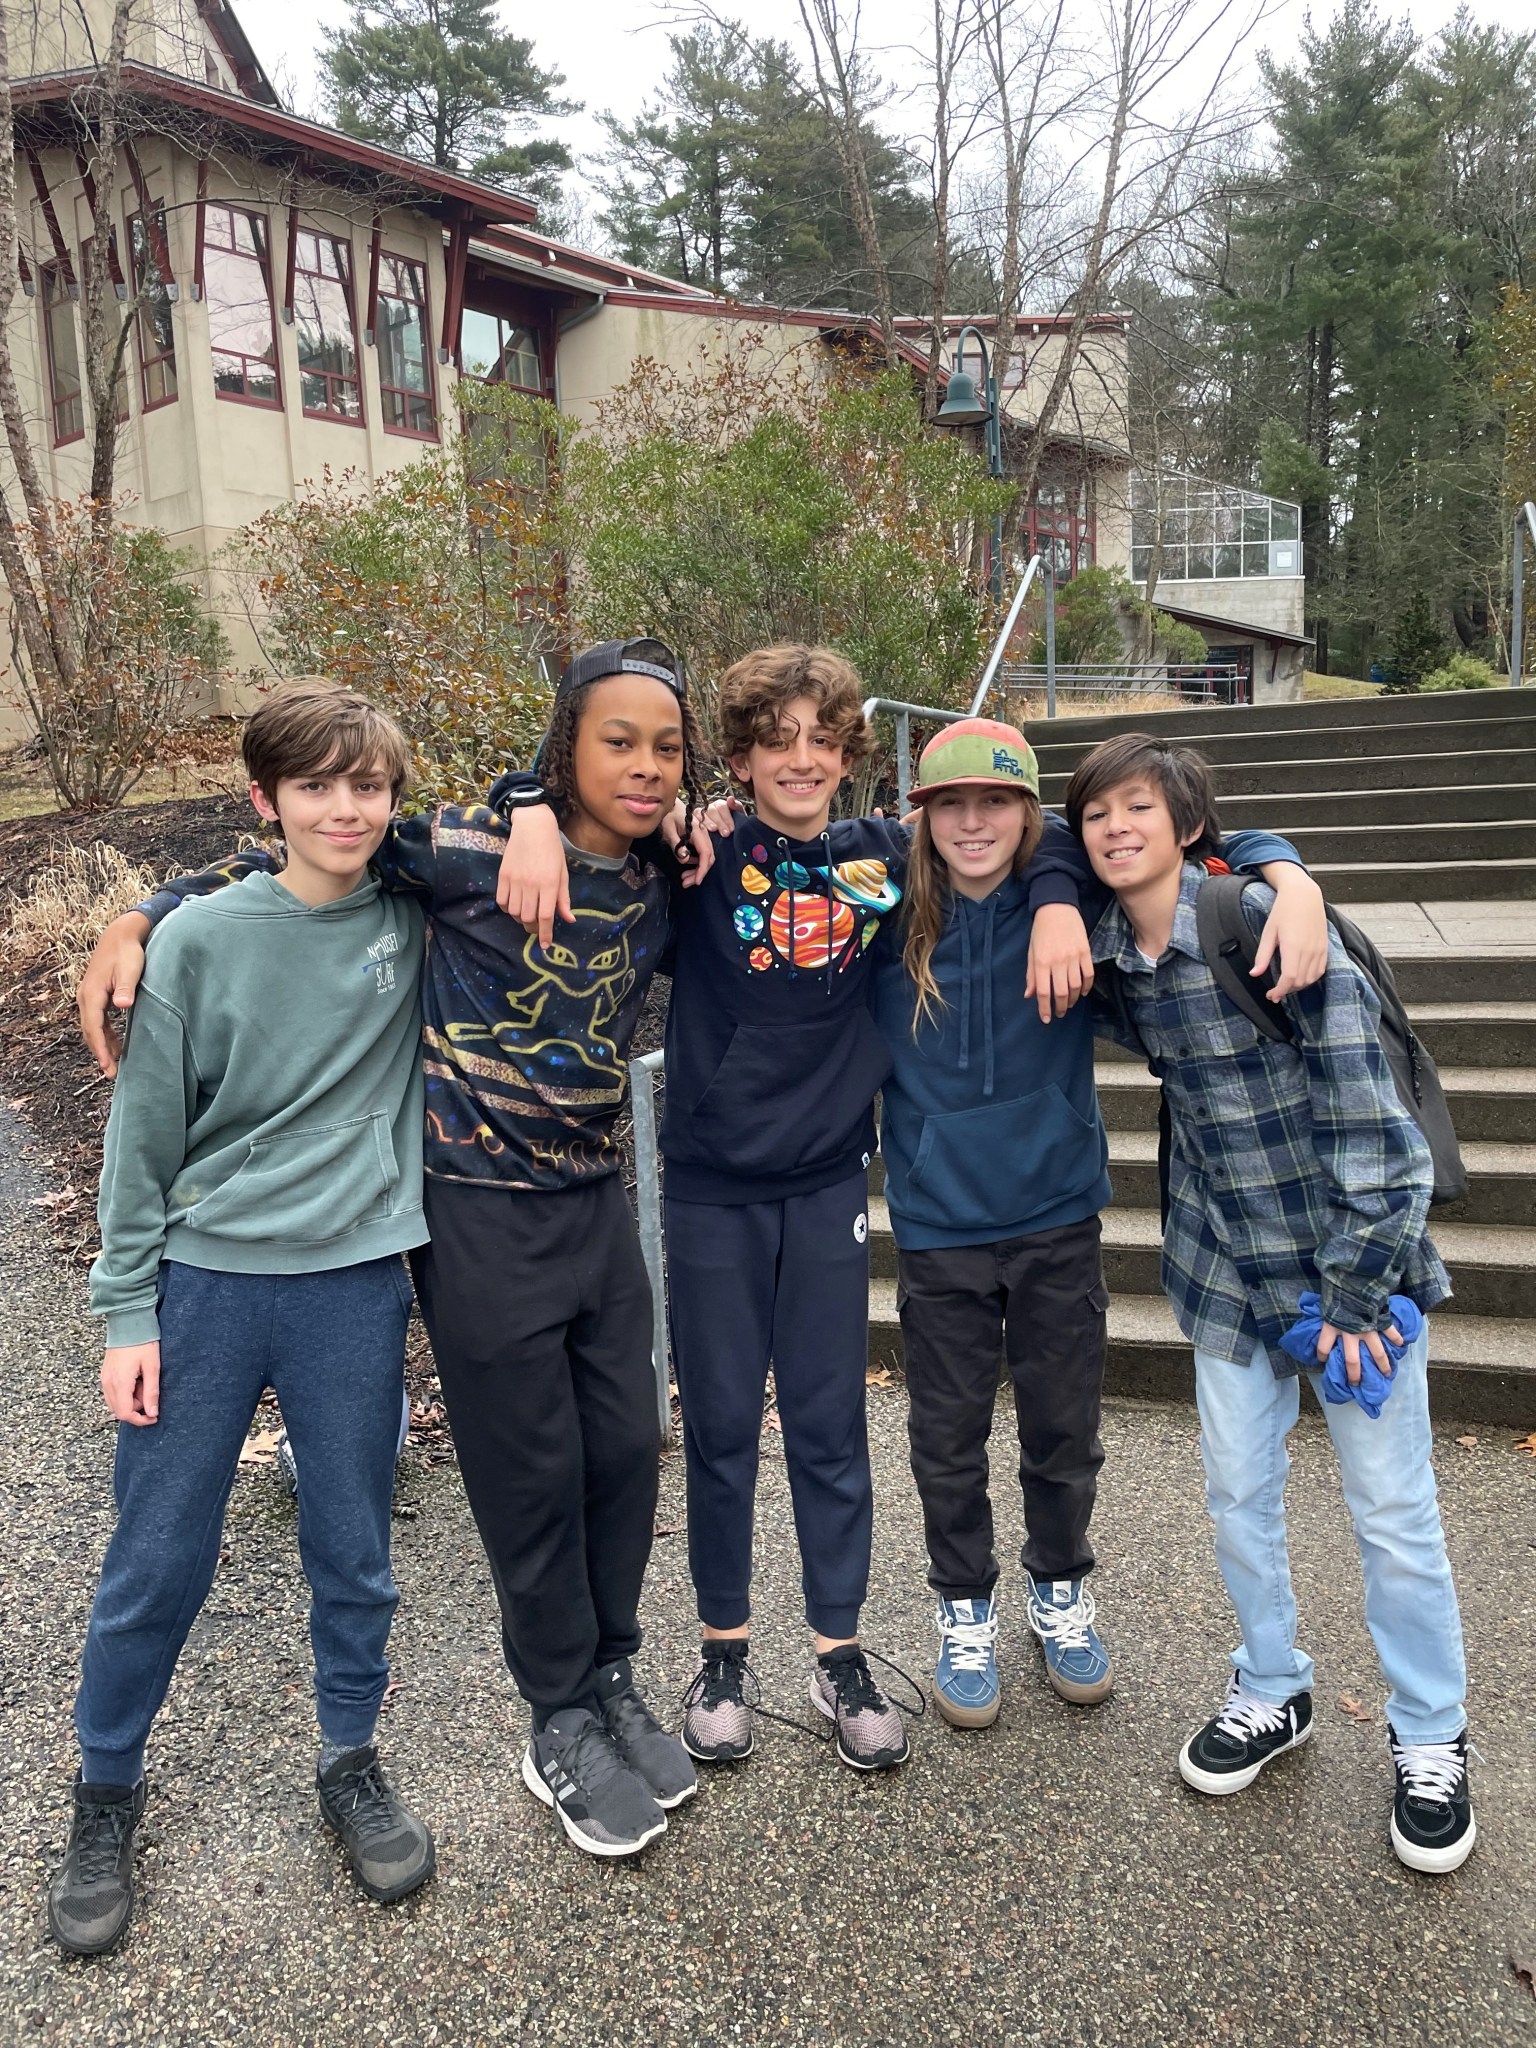 The Lykos Robotics team from the Waring School in Beverly, Massachusetts, from left to right, Max Cook, Eli Lapaix, Dimitri Profis, Nadav Buhkin, and Caleb Sylvester. 